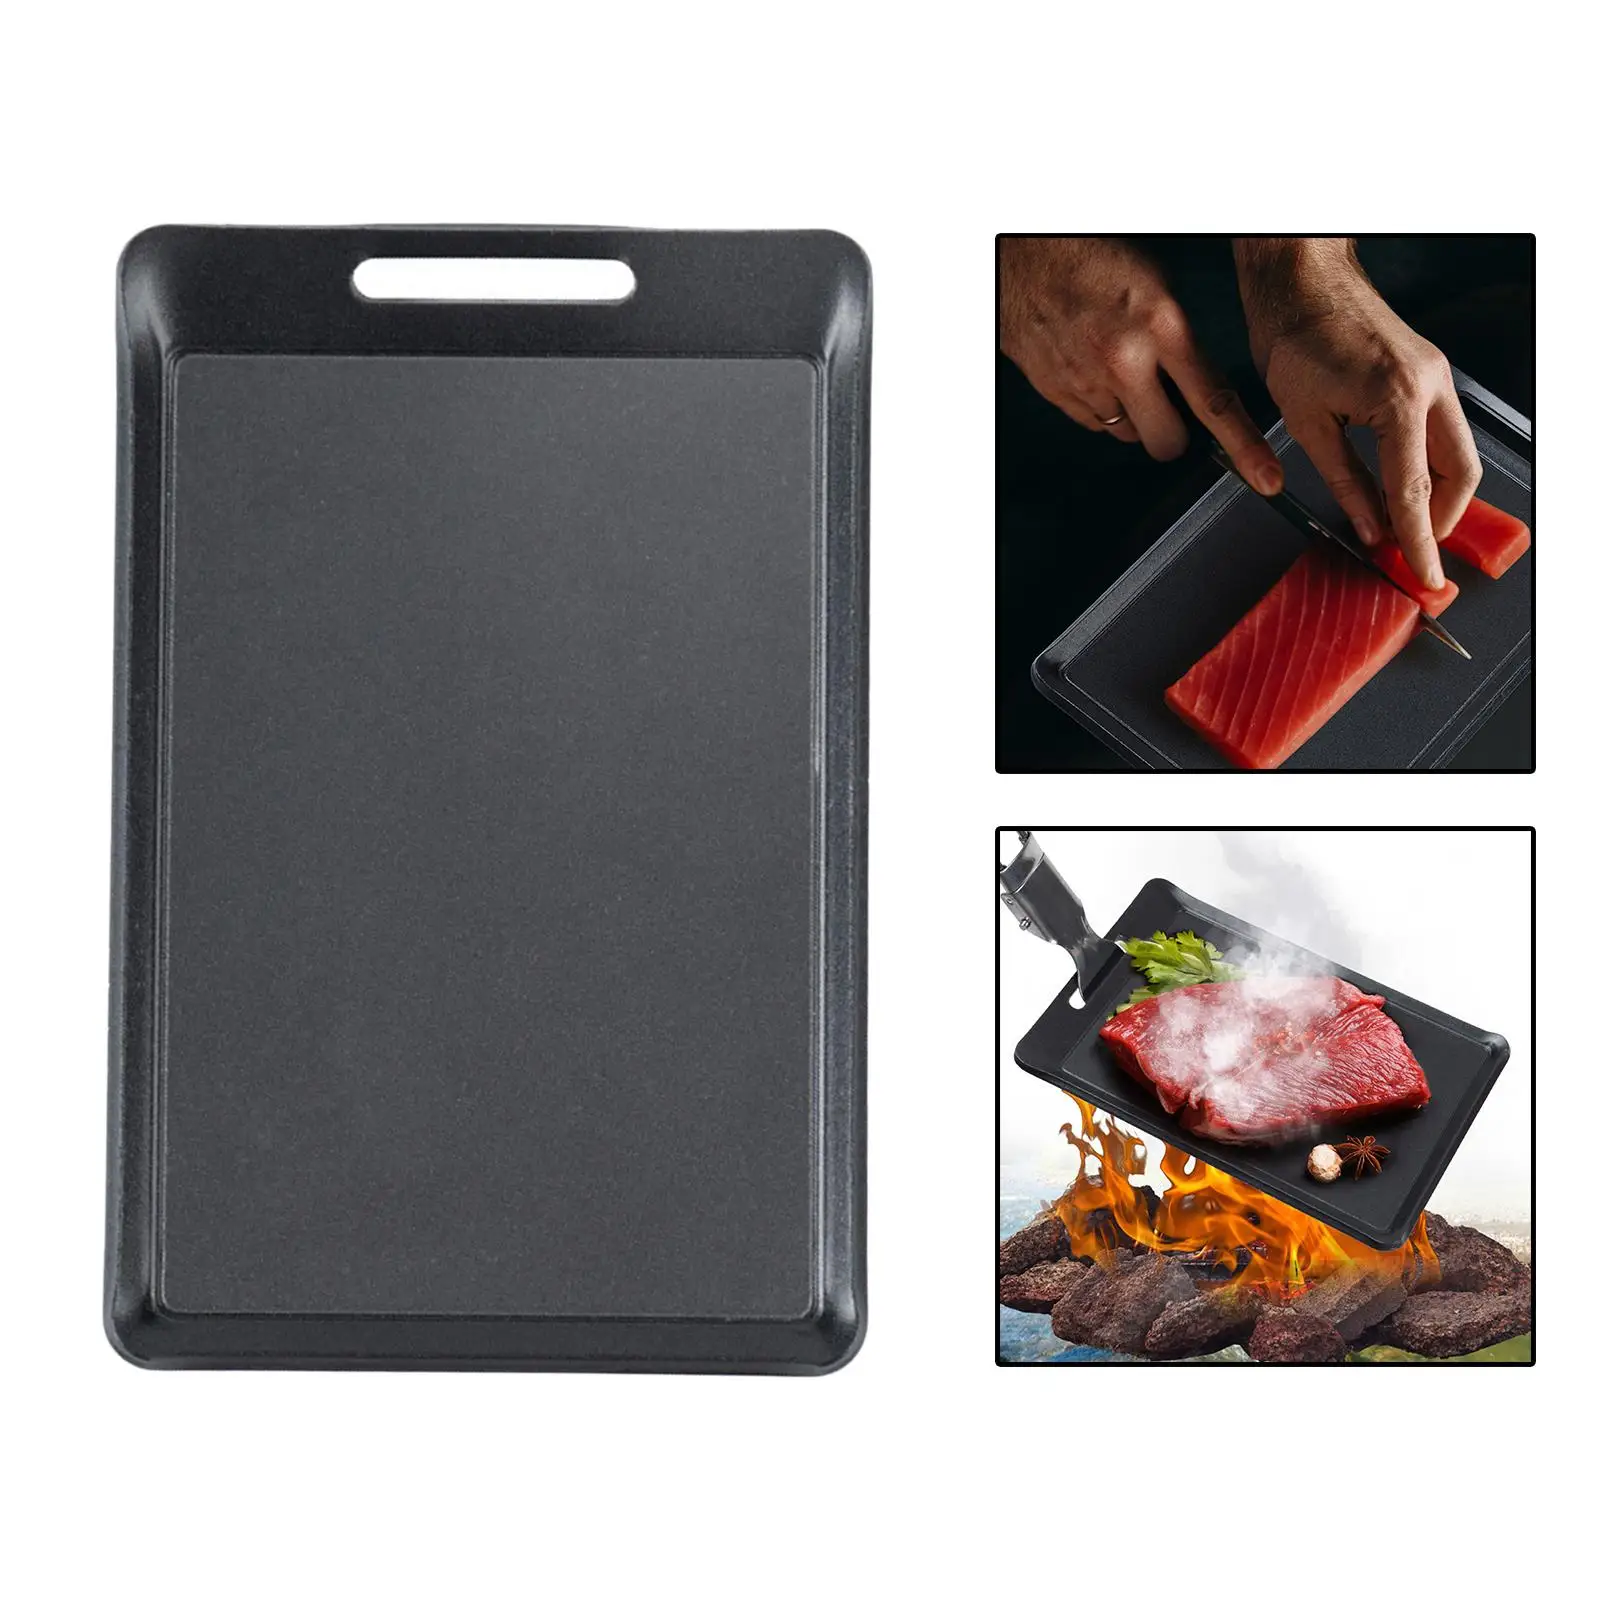 Small Stick Portable Top Plate Teppanyaki Barbecue Griddle Pan Steak Camping Picnic Outdoor, Size: 13X8.5cm, Black